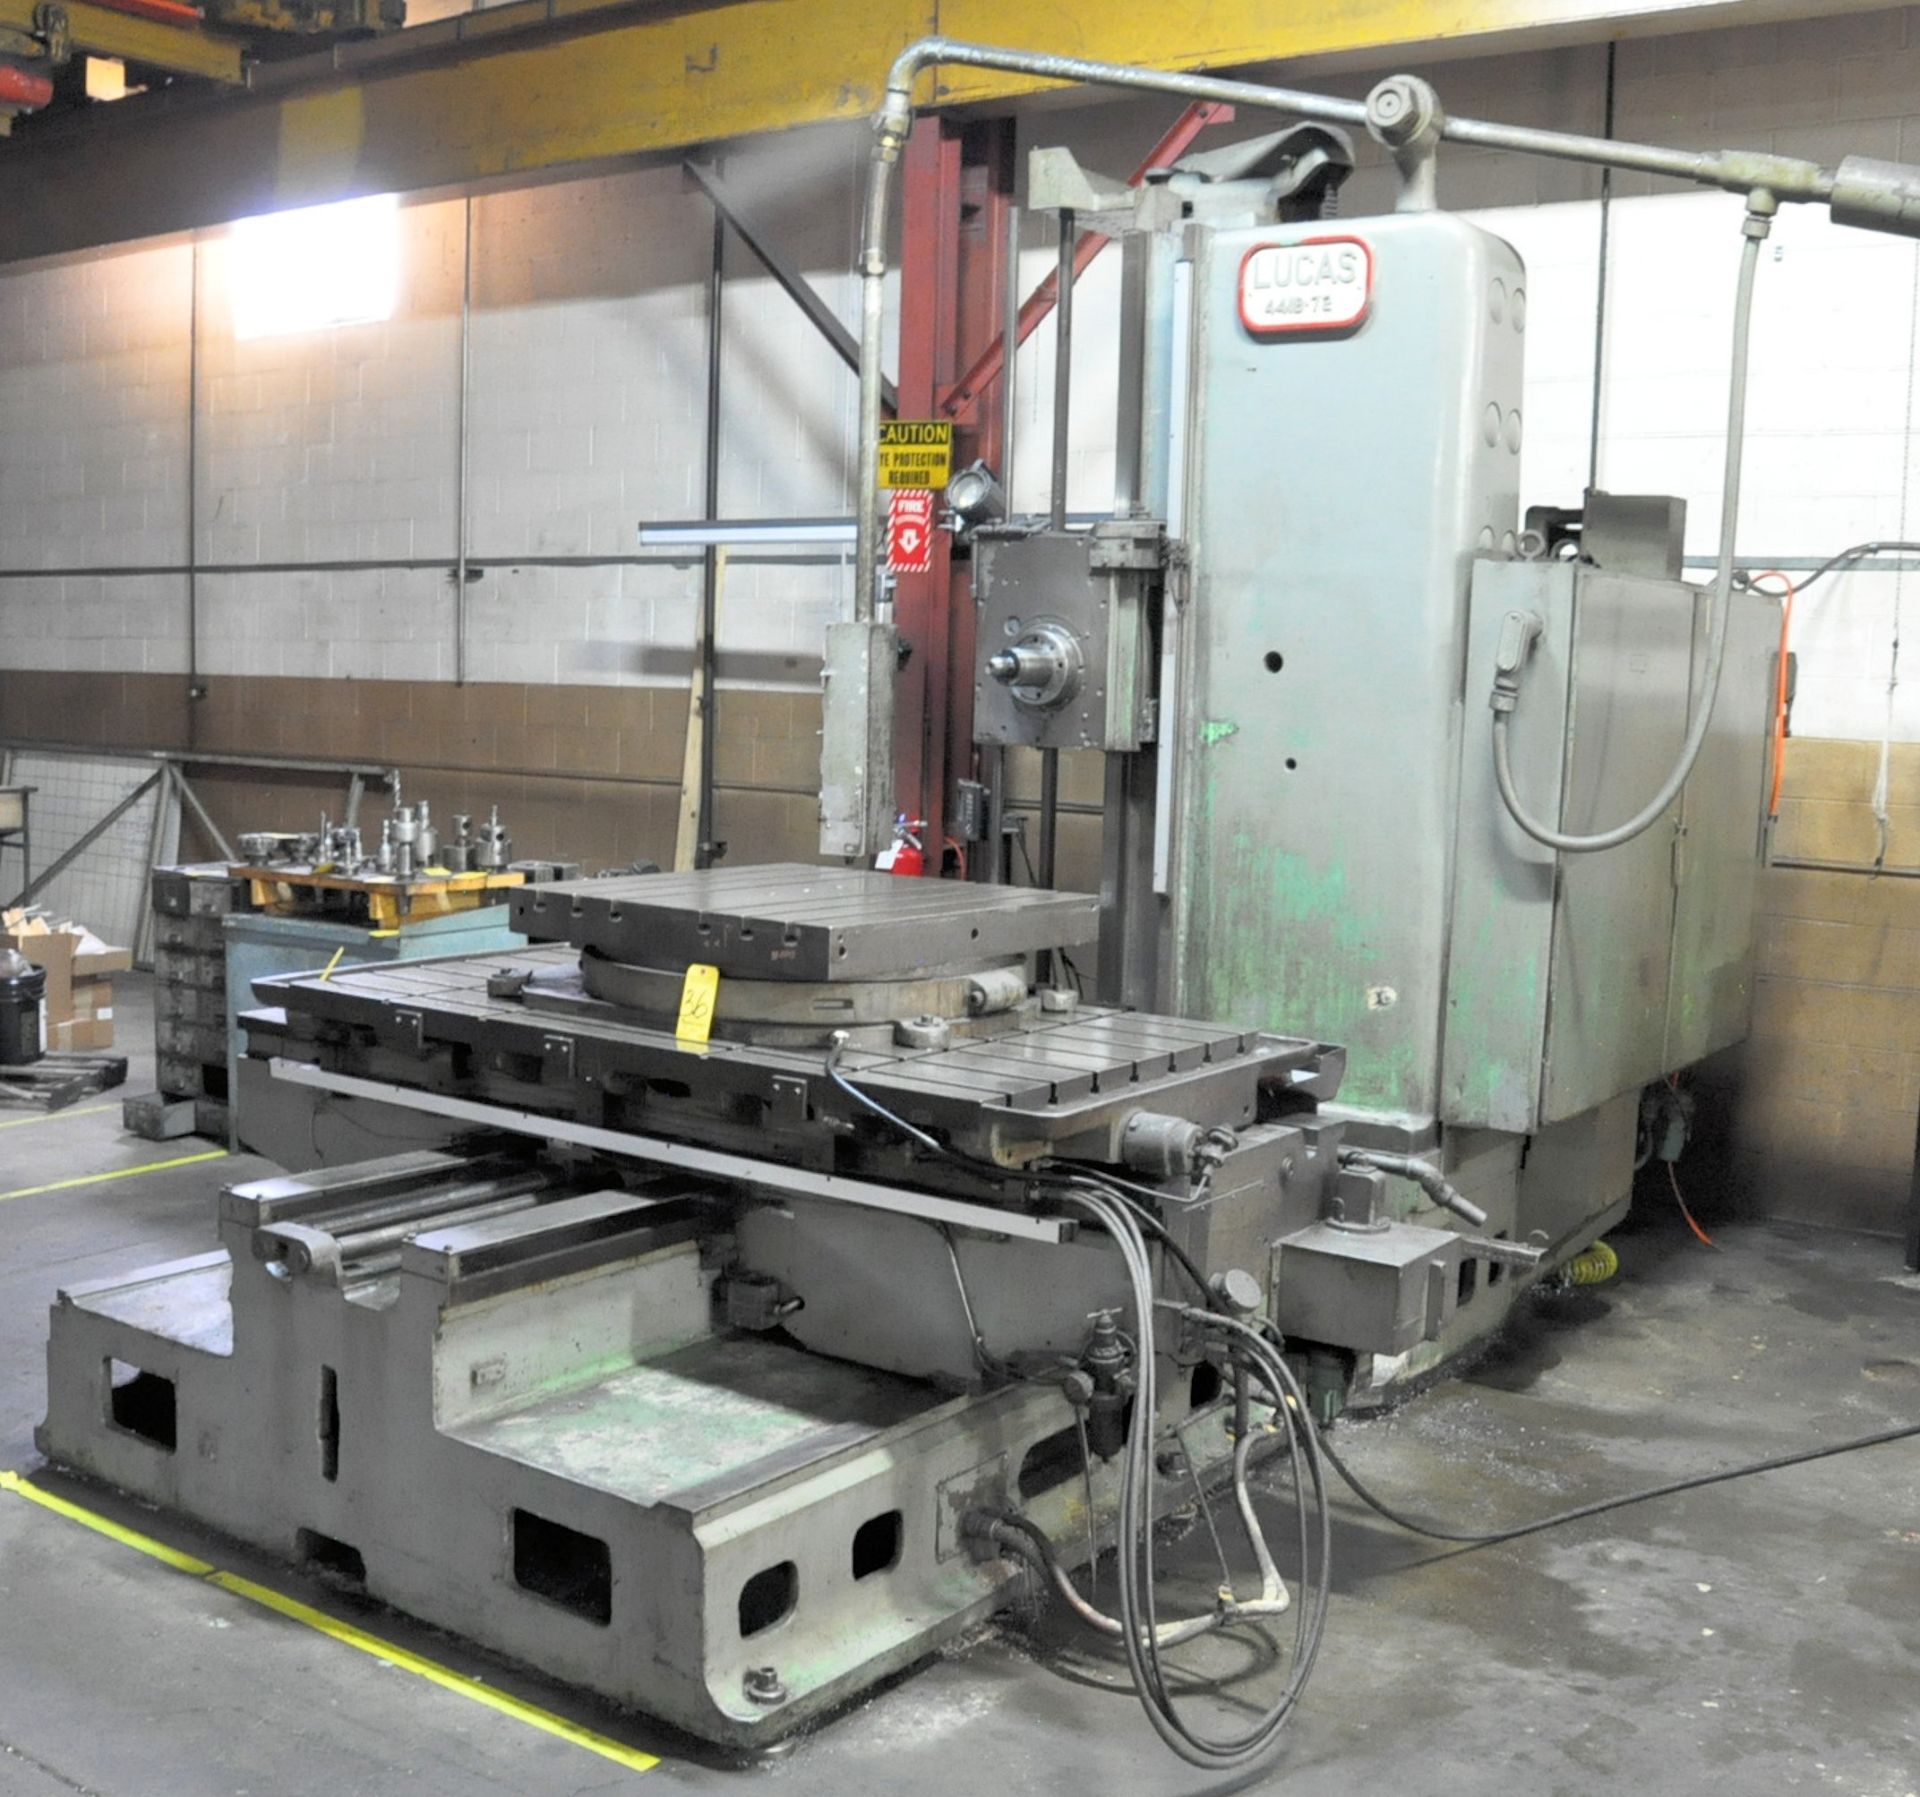 Lucas Model 441B-72 Horizontal Boring and Milling Machine, 4 Inch Spindle, Anilam Wizard 550 D.R.O., - Image 2 of 5